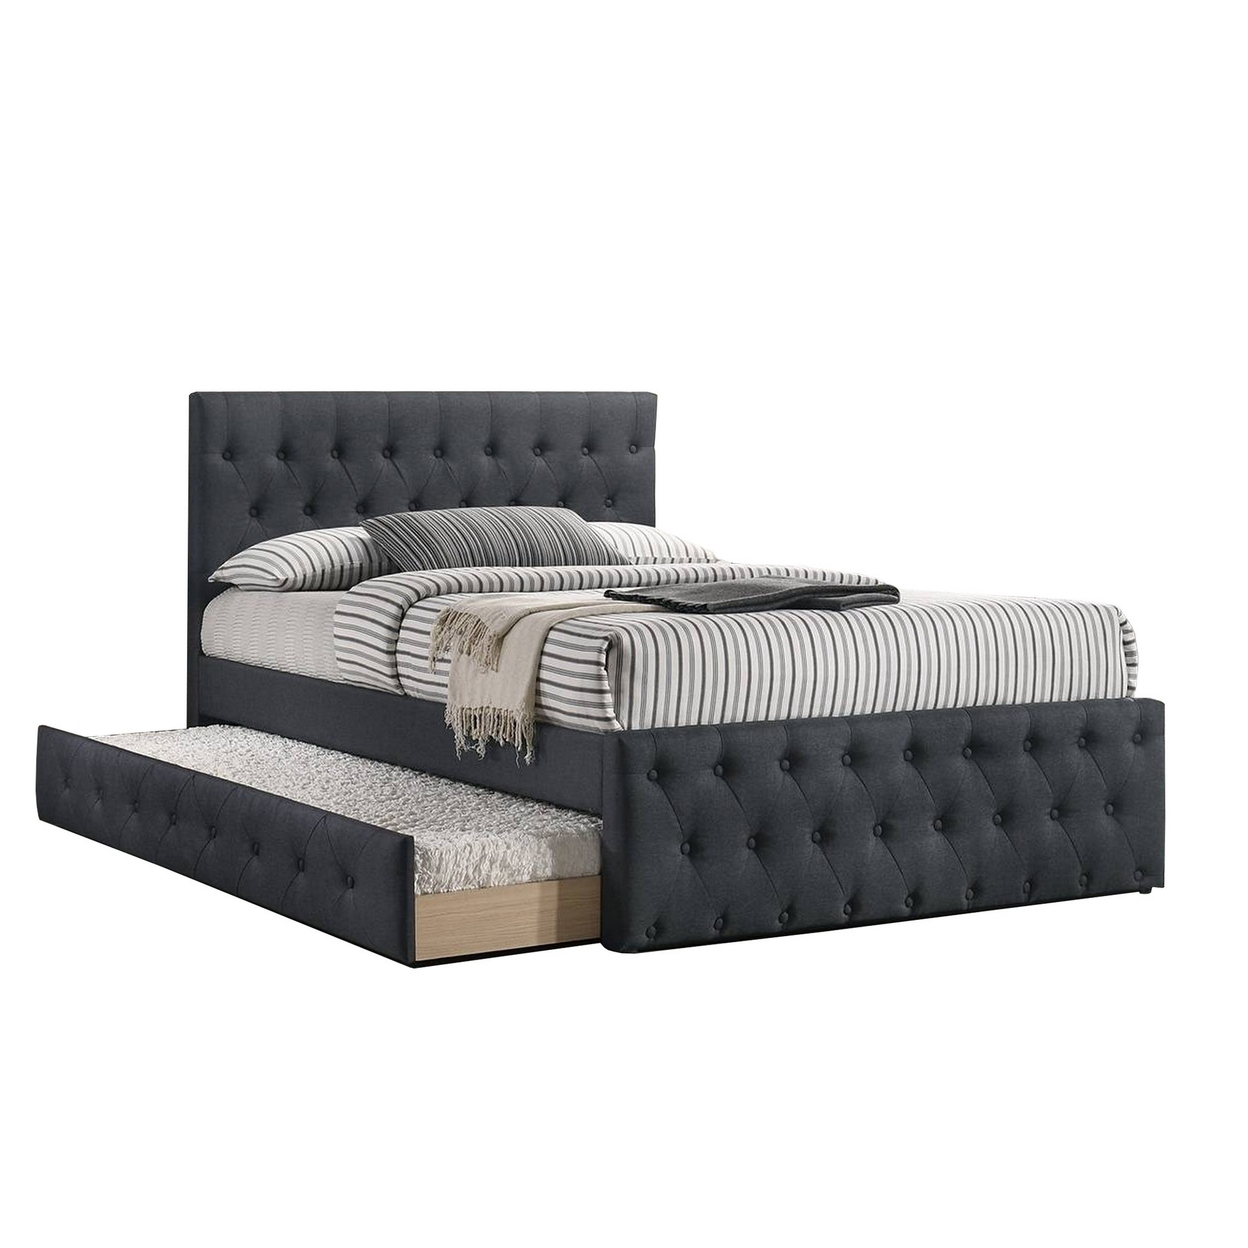 Nek Wood Twin Size Upholstered Bed With Trundle, Tufted Charcoal Burlap- Saltoro Sherpi